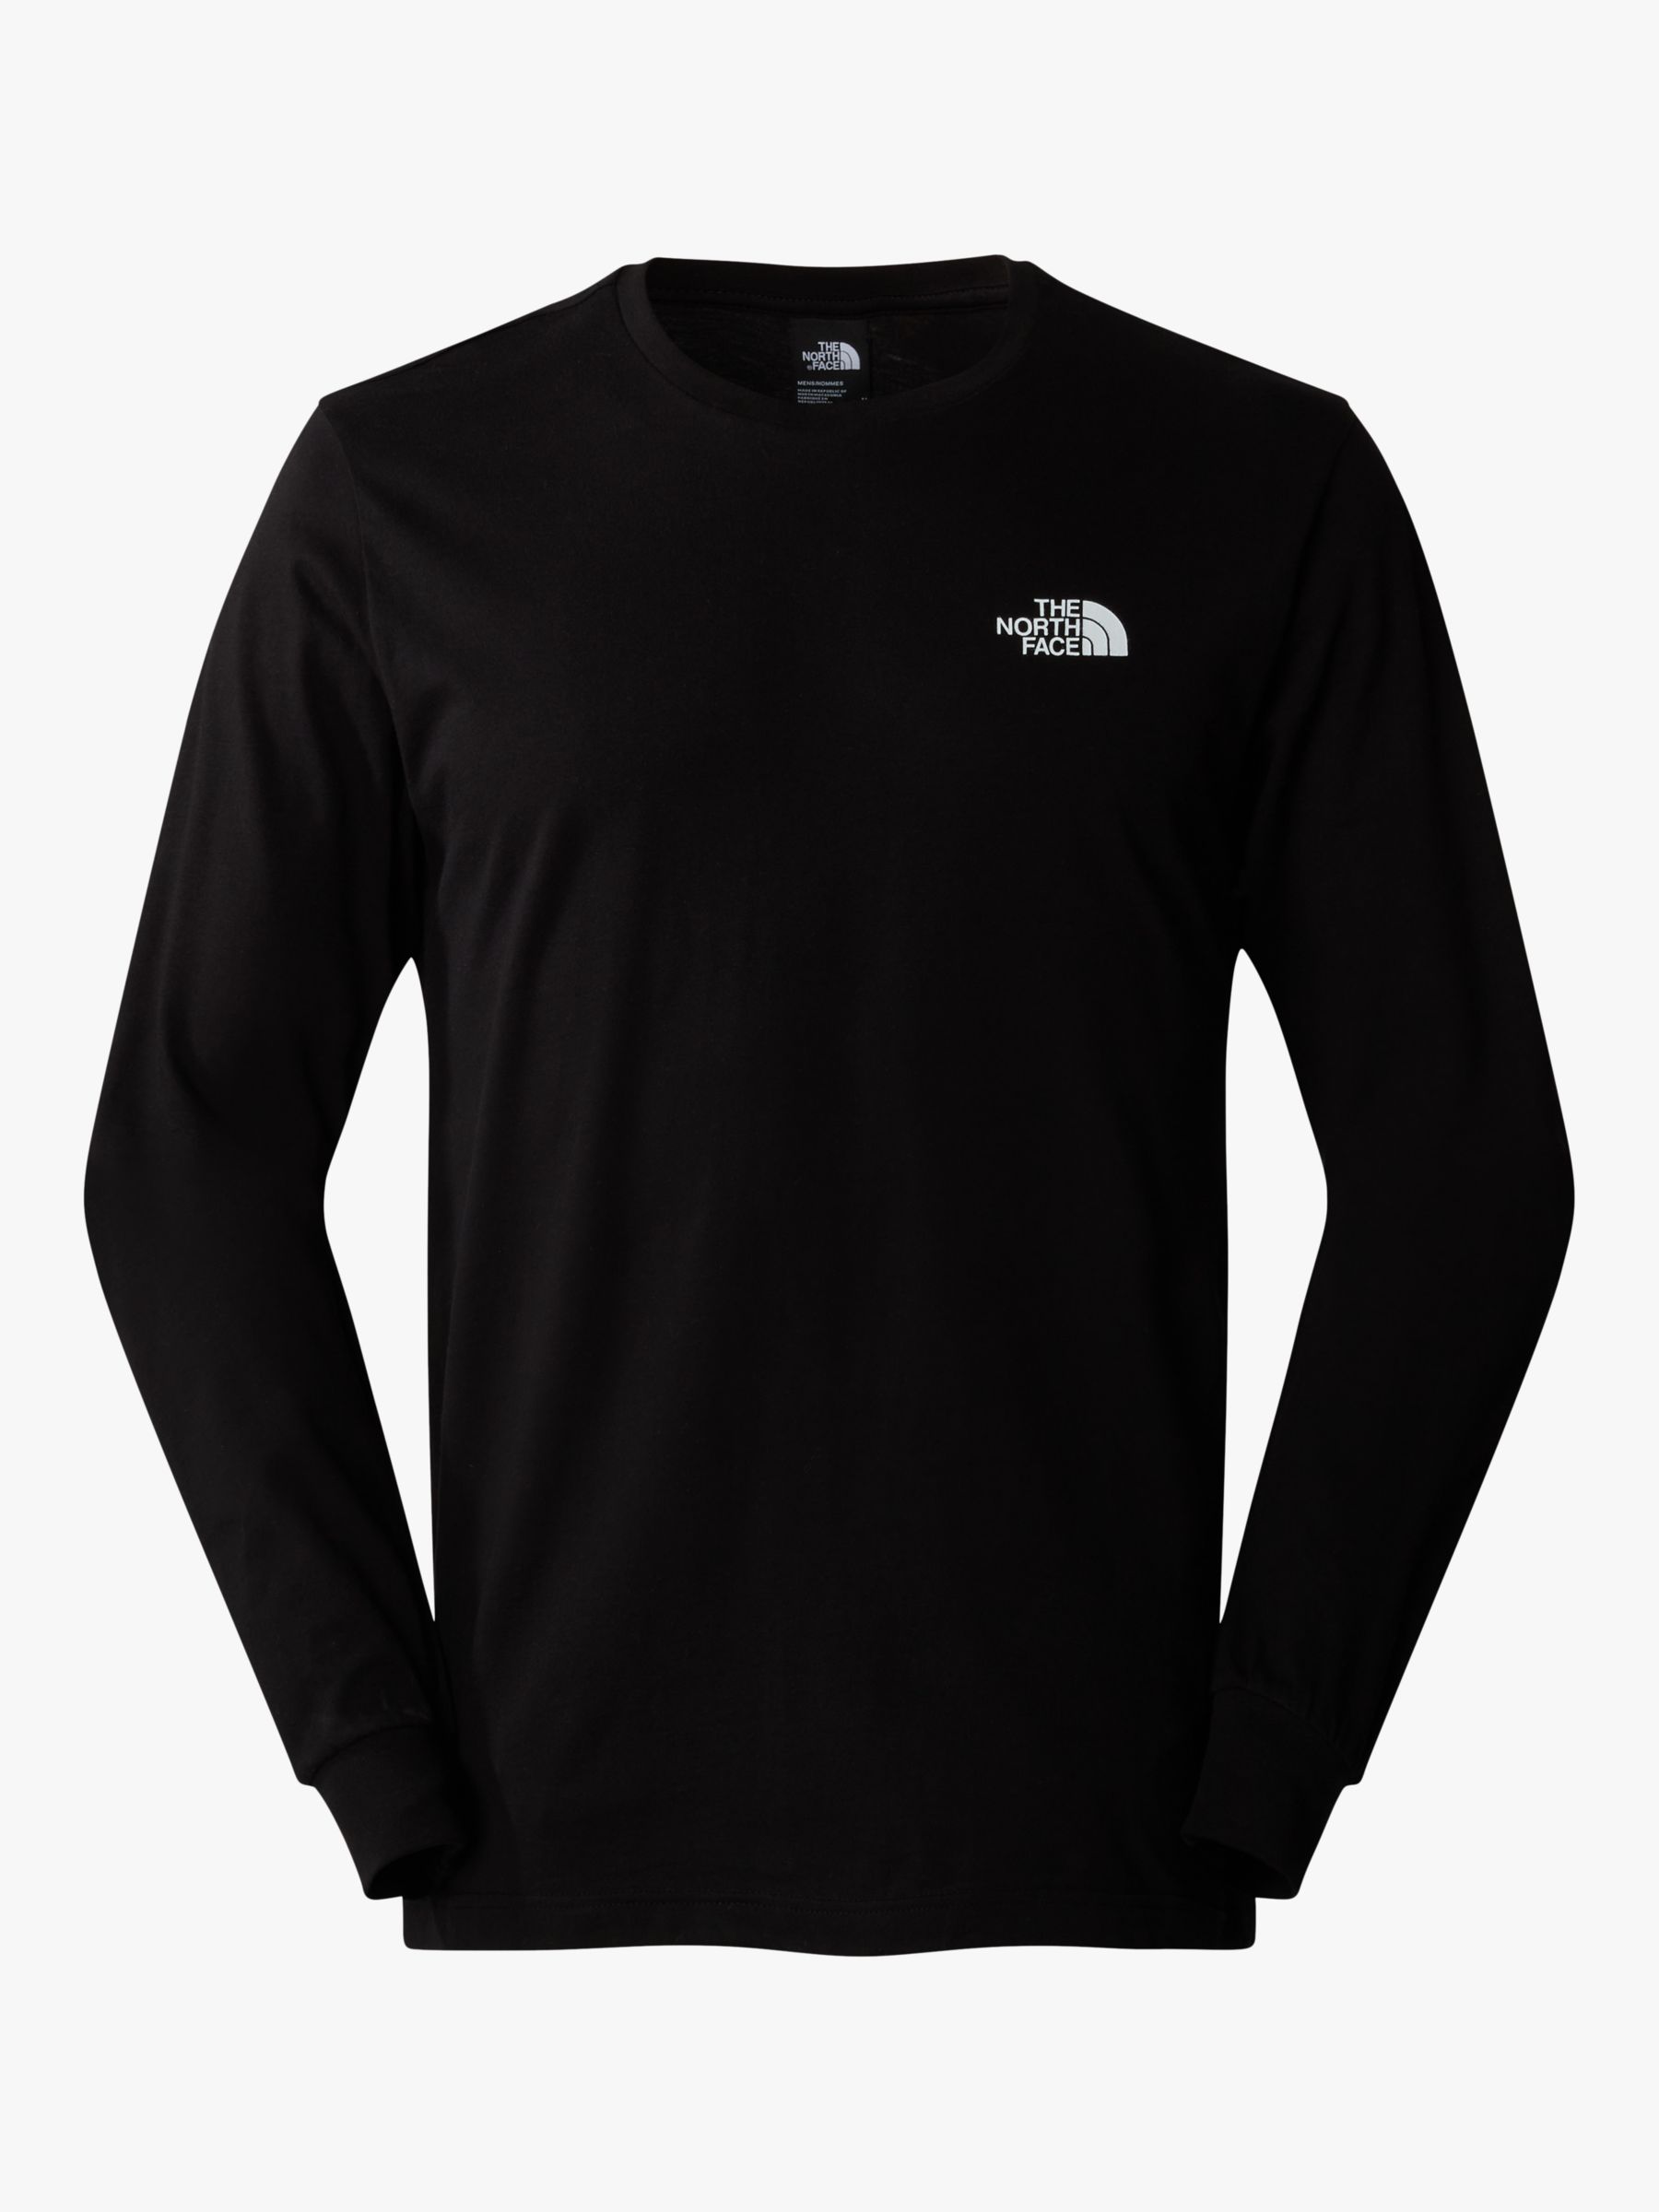 The North Face Easy Long Sleeve T-Shirt, Black, XL